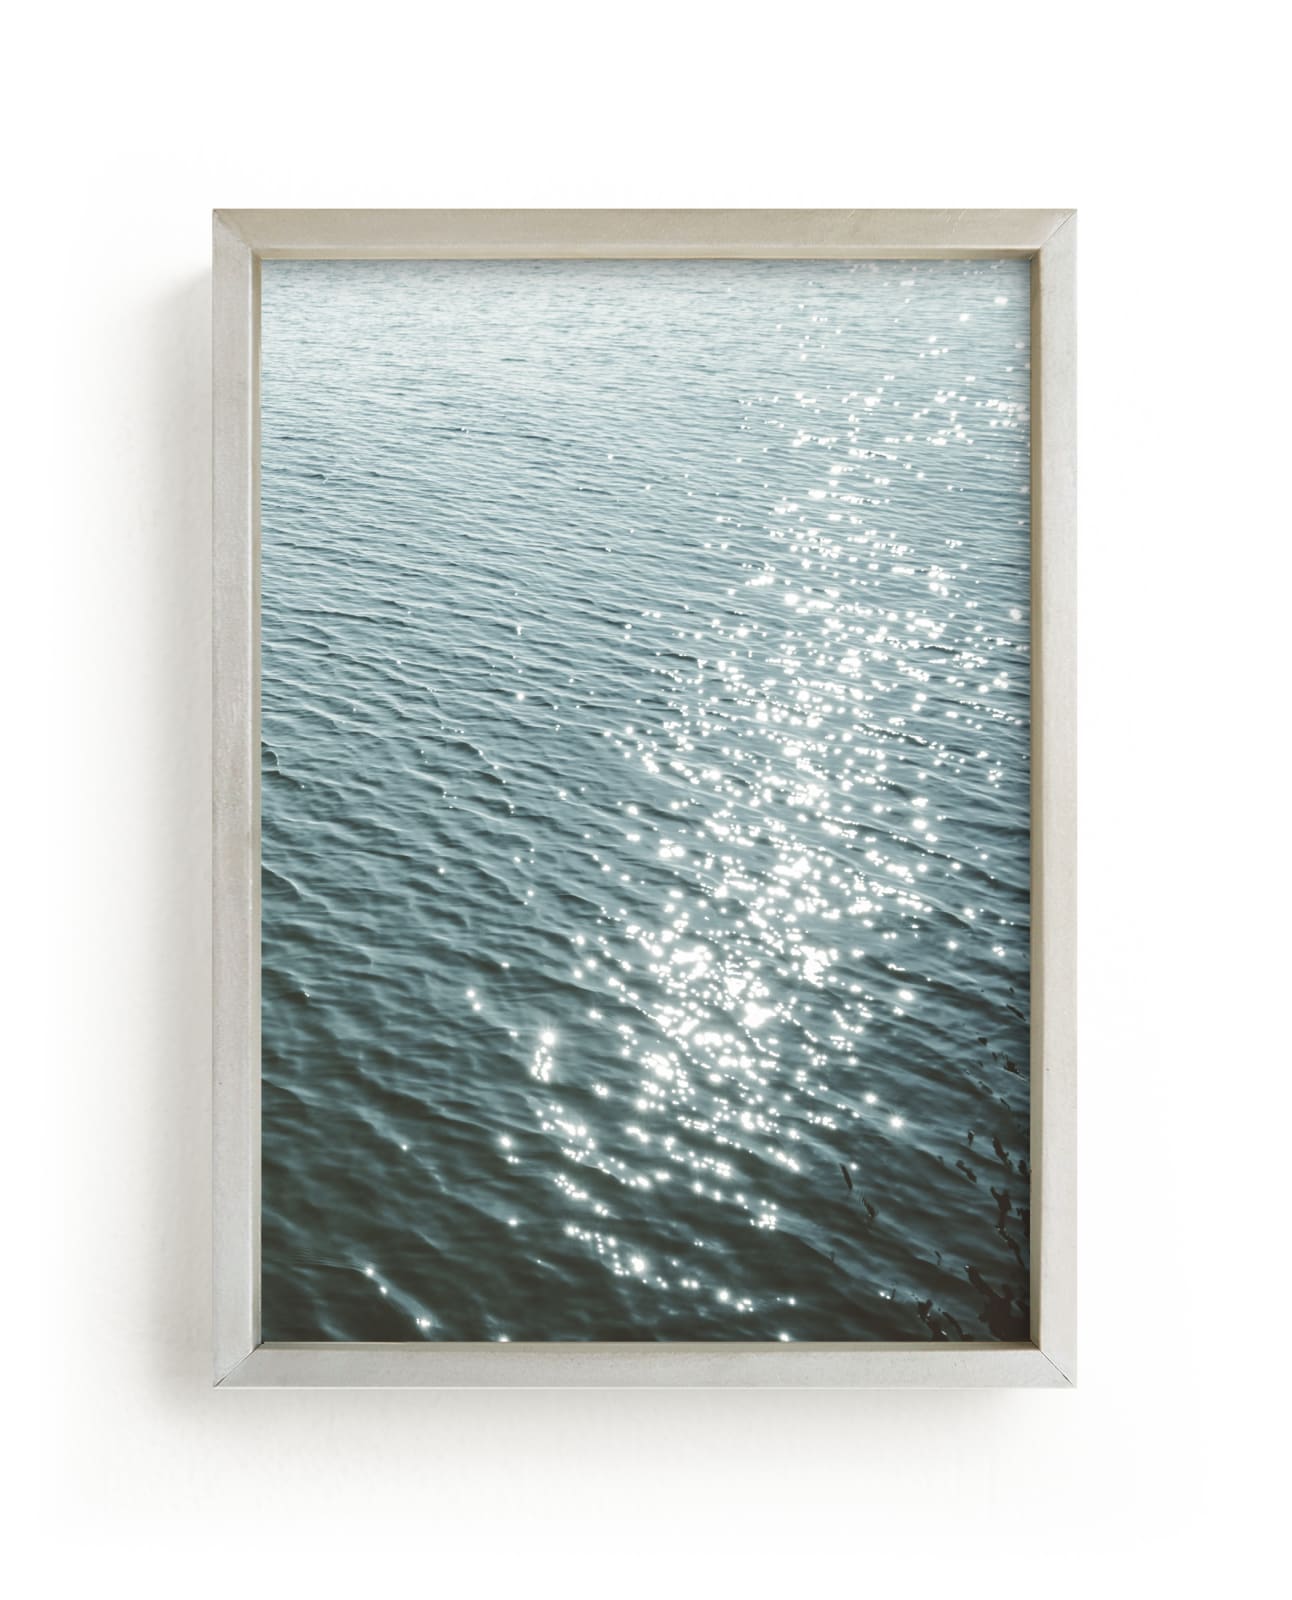 "Turquoise breath II" by Lying on the grass in beautiful frame options and a variety of sizes.